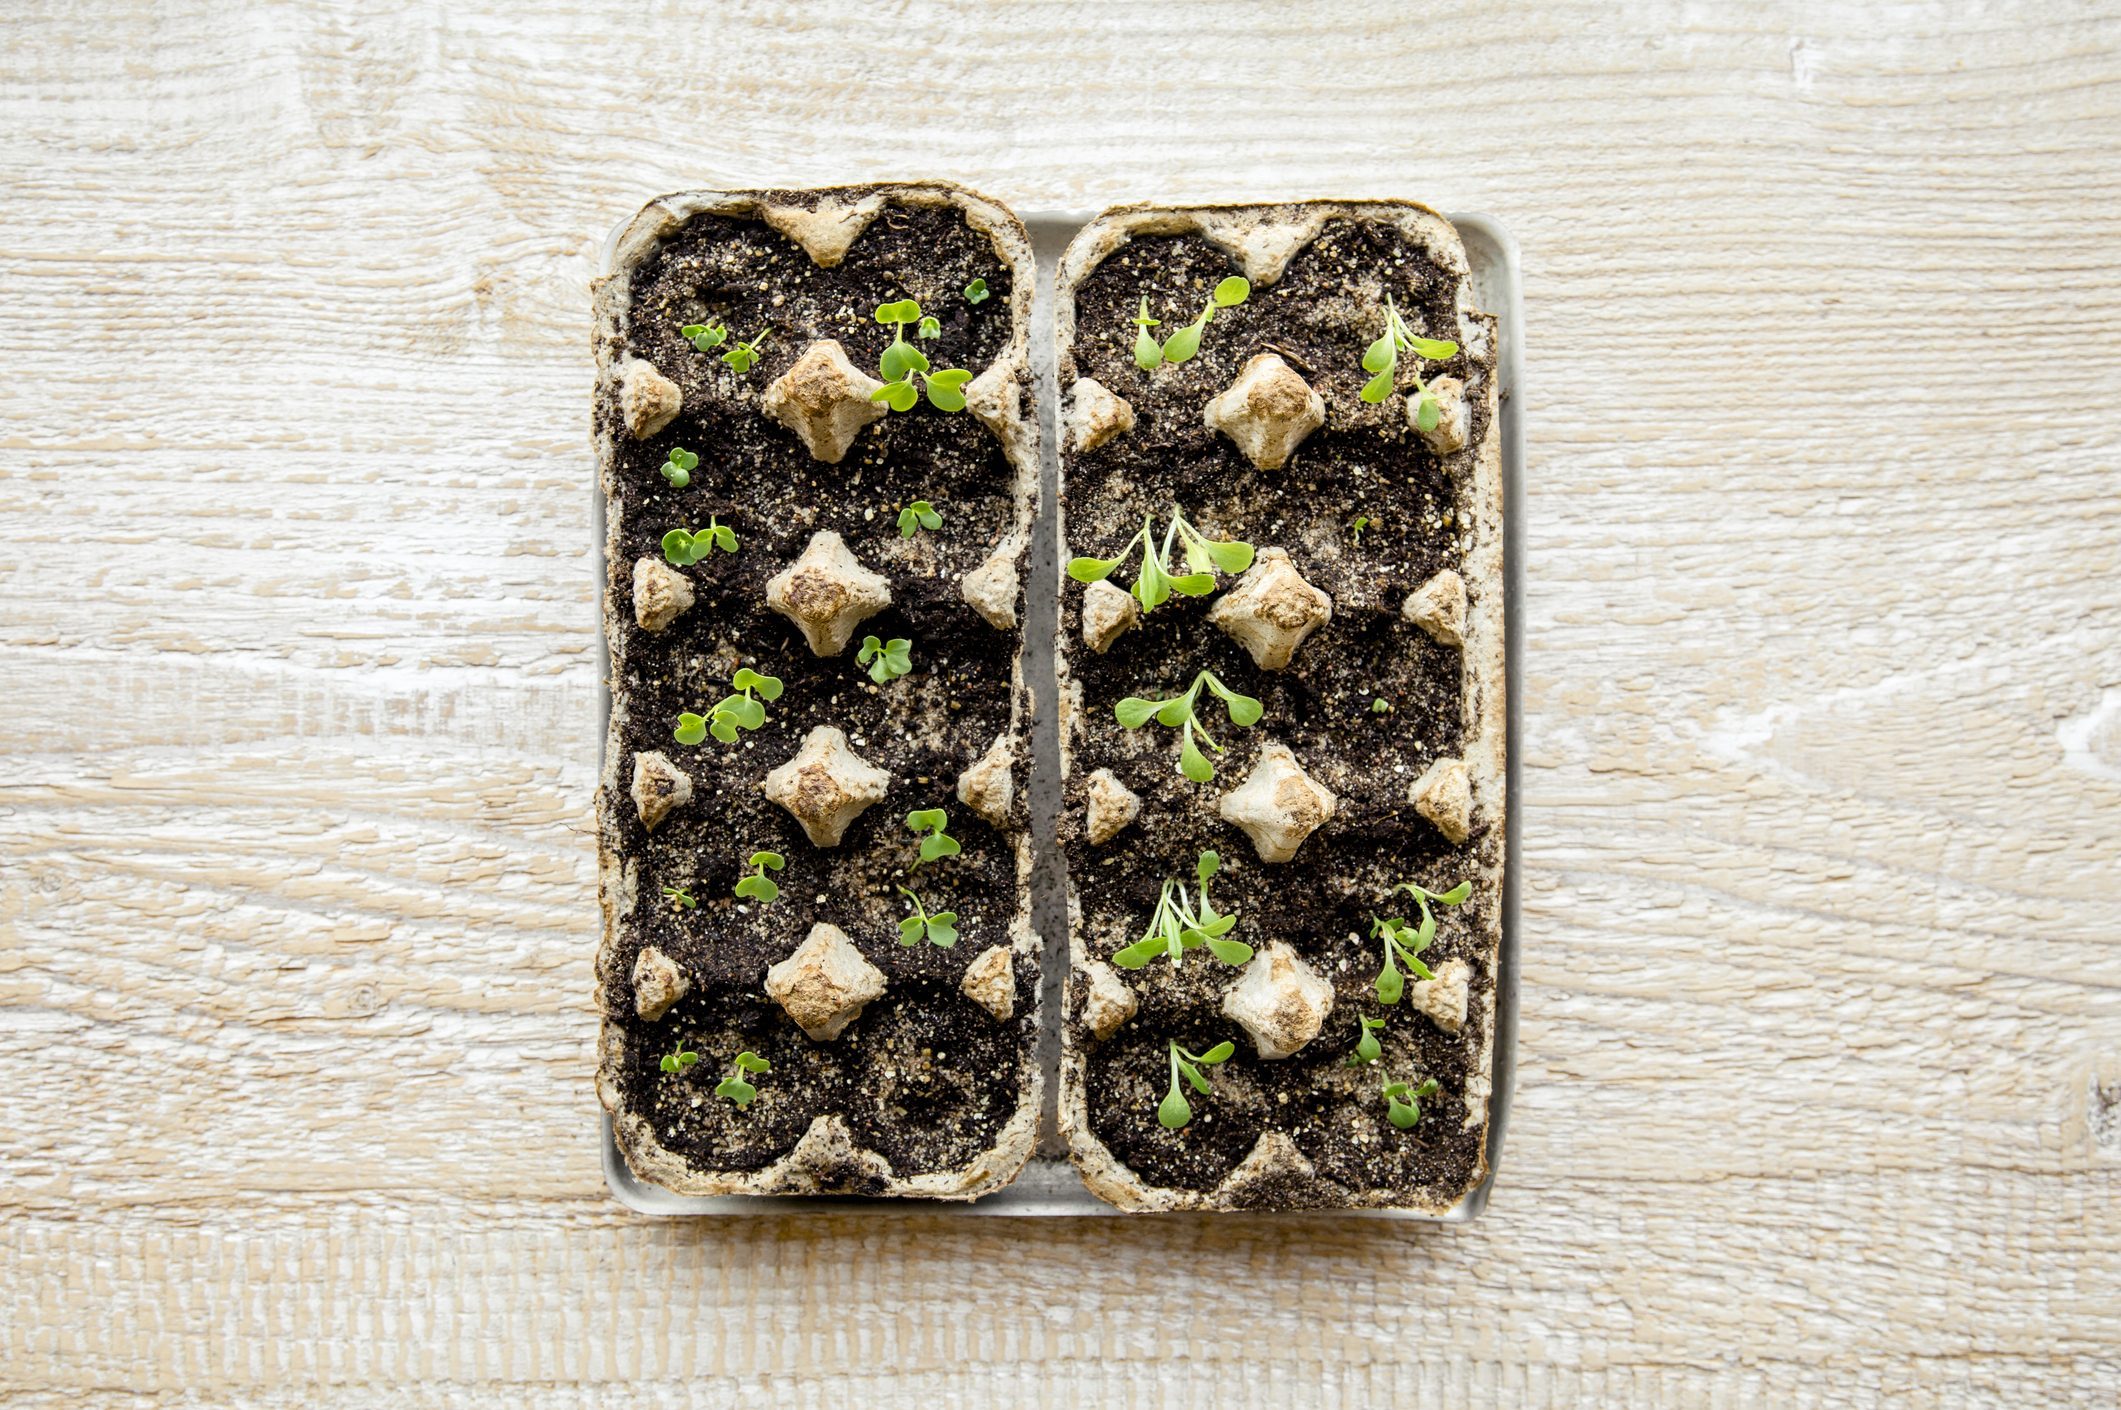 How To Start Seeds Indoors